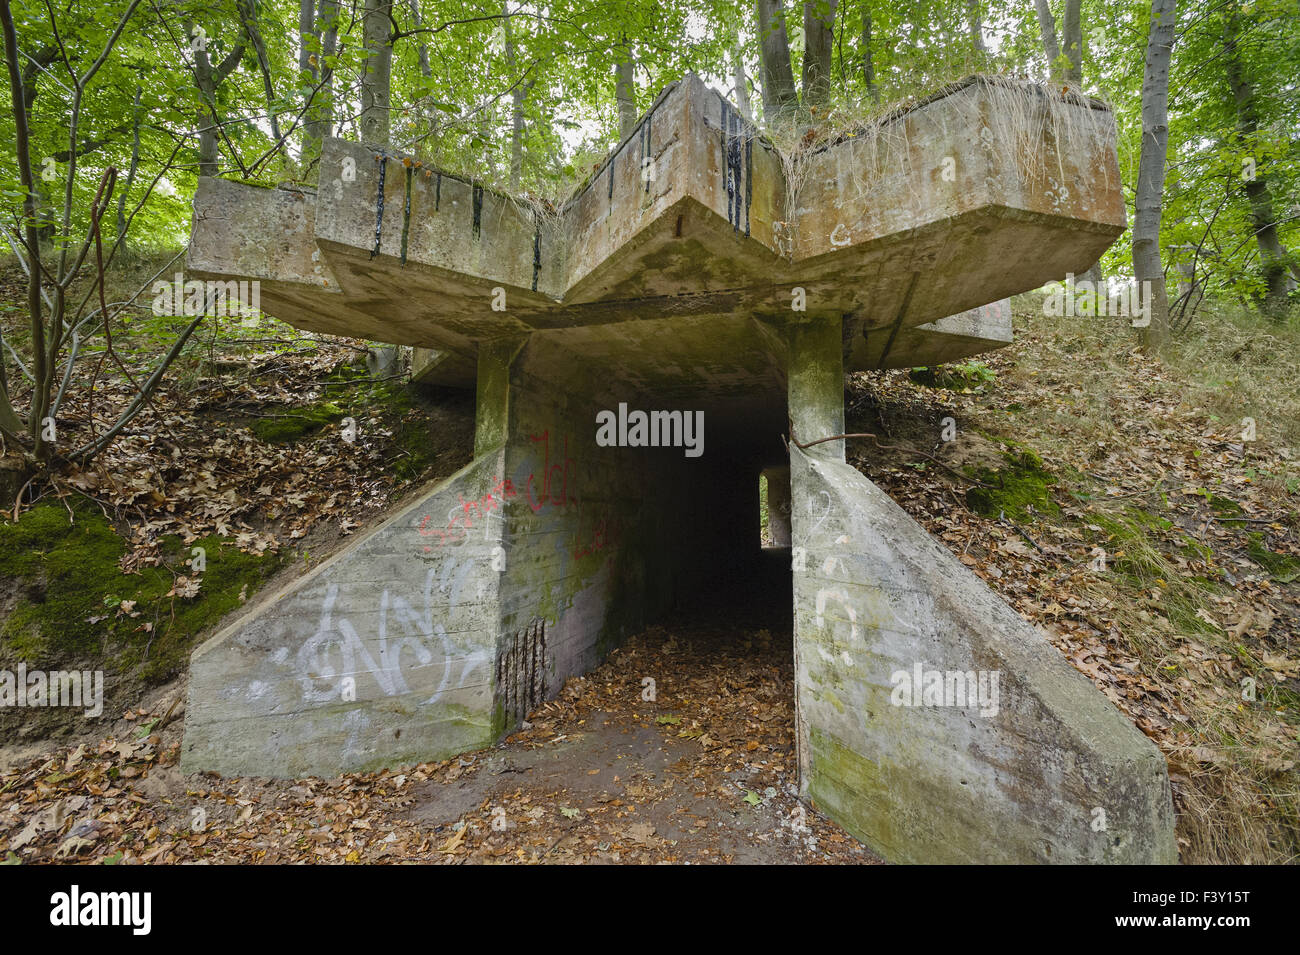 Remains of a dynamite factory, Germany Stock Photo